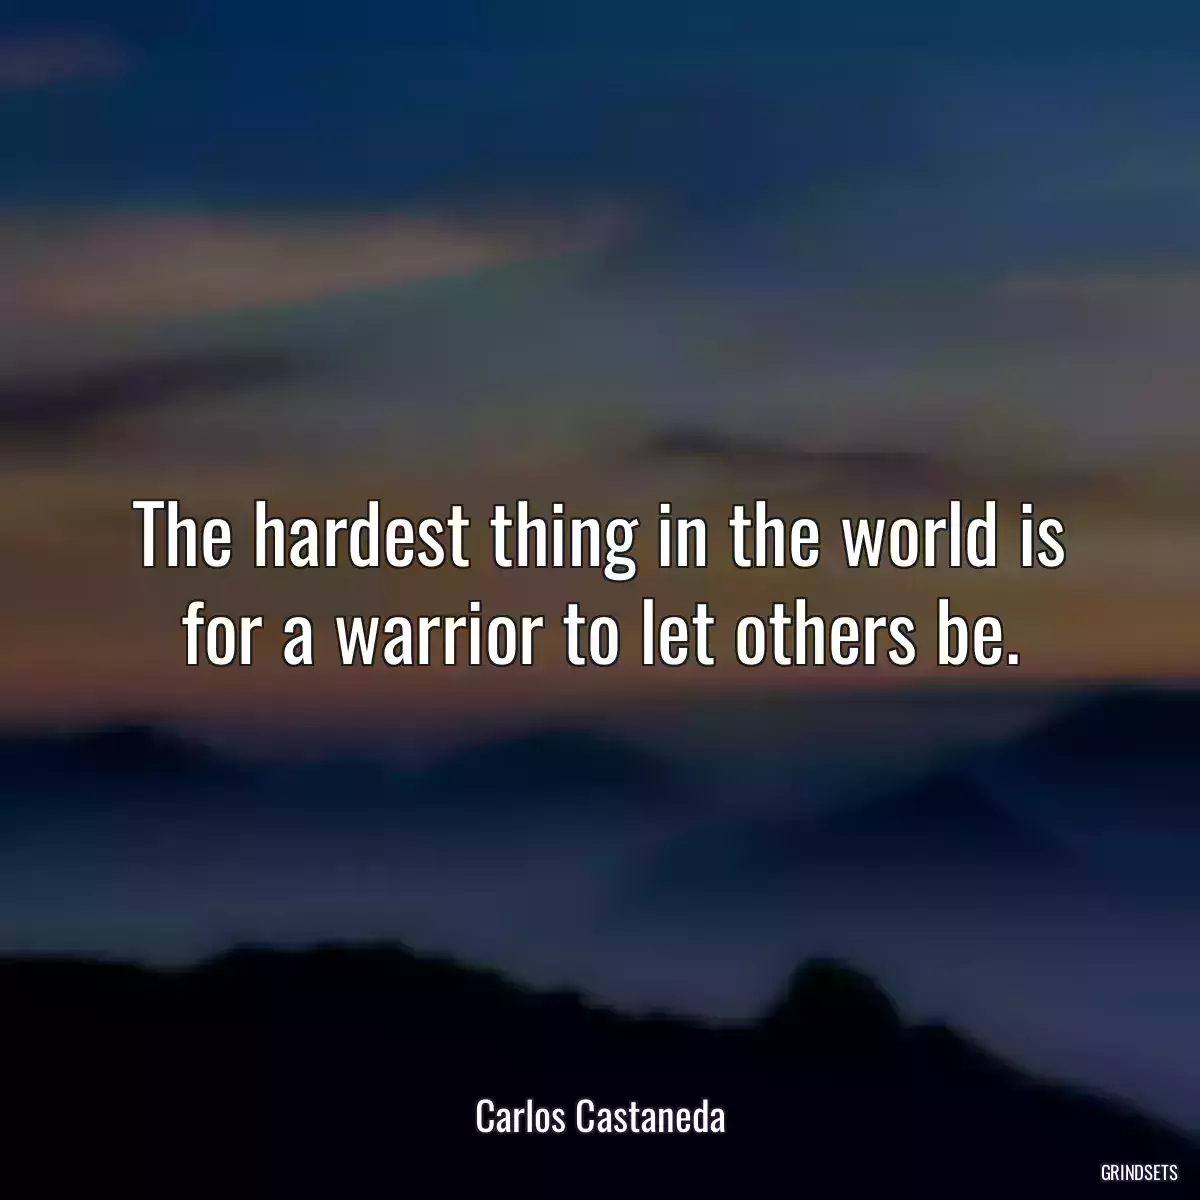 The hardest thing in the world is for a warrior to let others be.